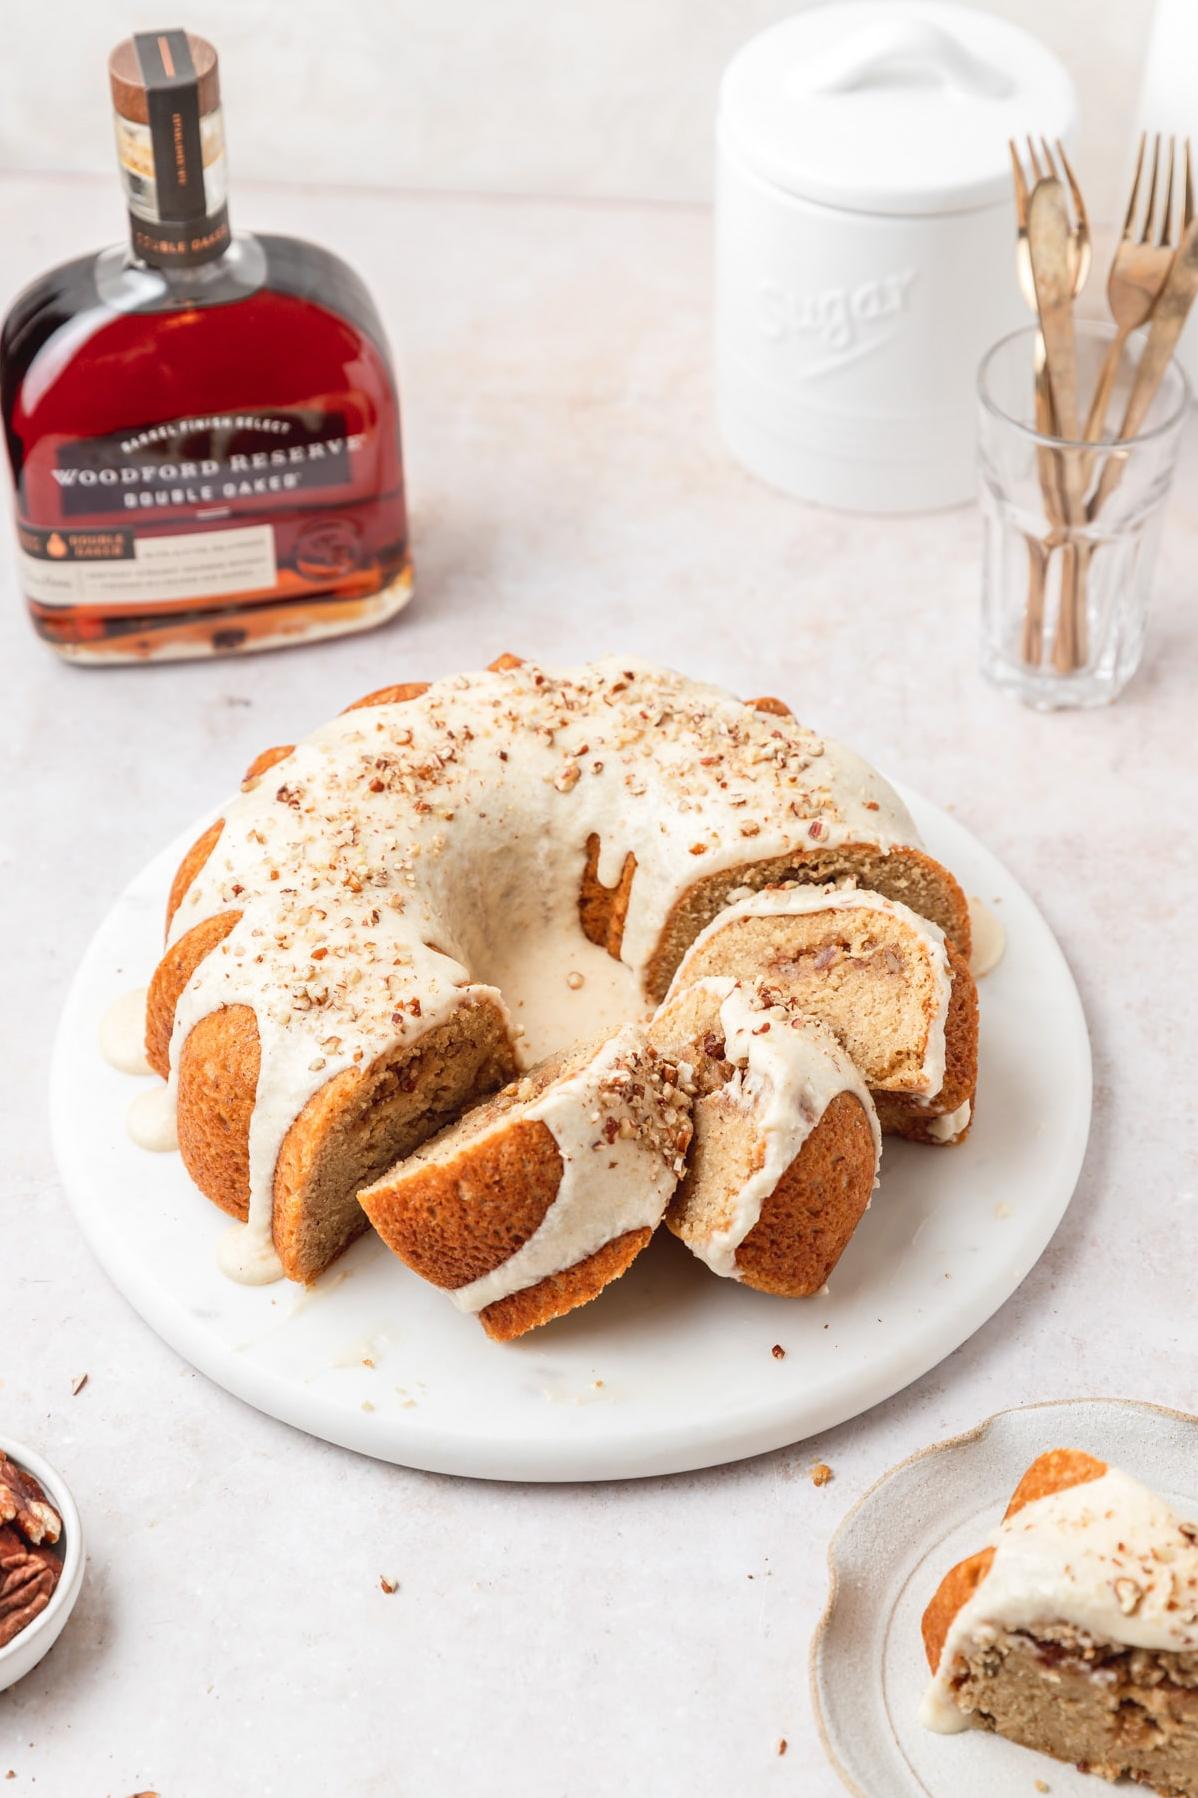  Get ready for a flavor explosion with this delicious Bourbon Pecan Pound Cake.